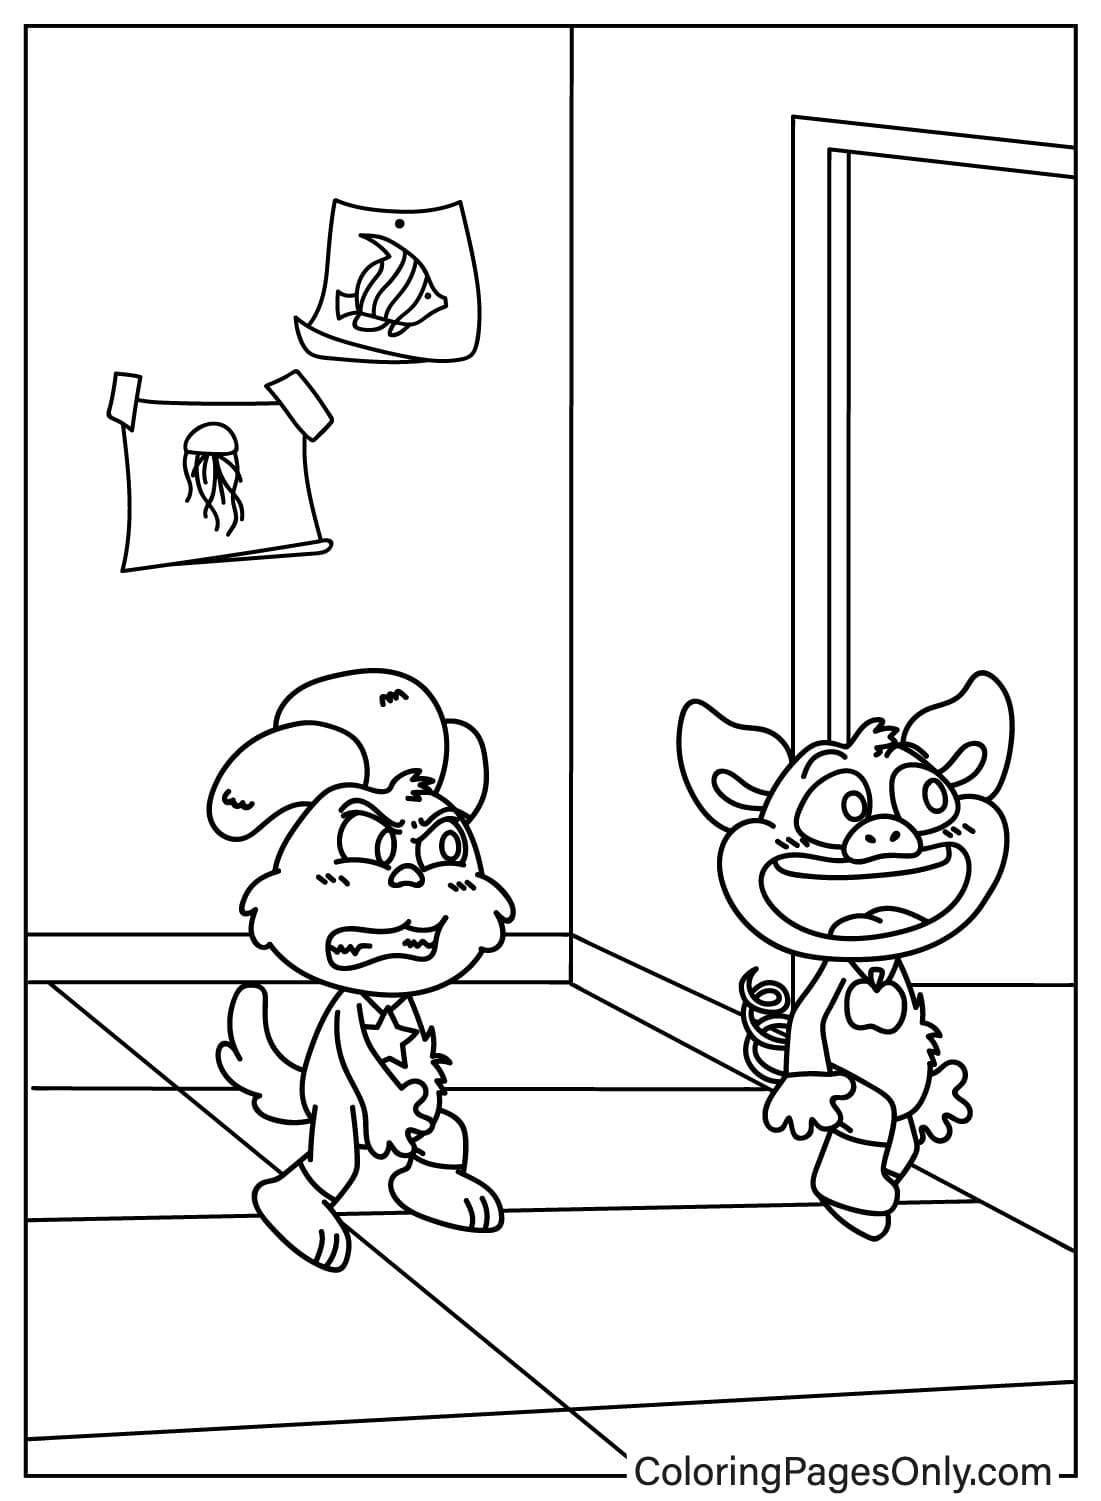 KickinChicken and PickyPiggy Coloring Page from PickyPiggy